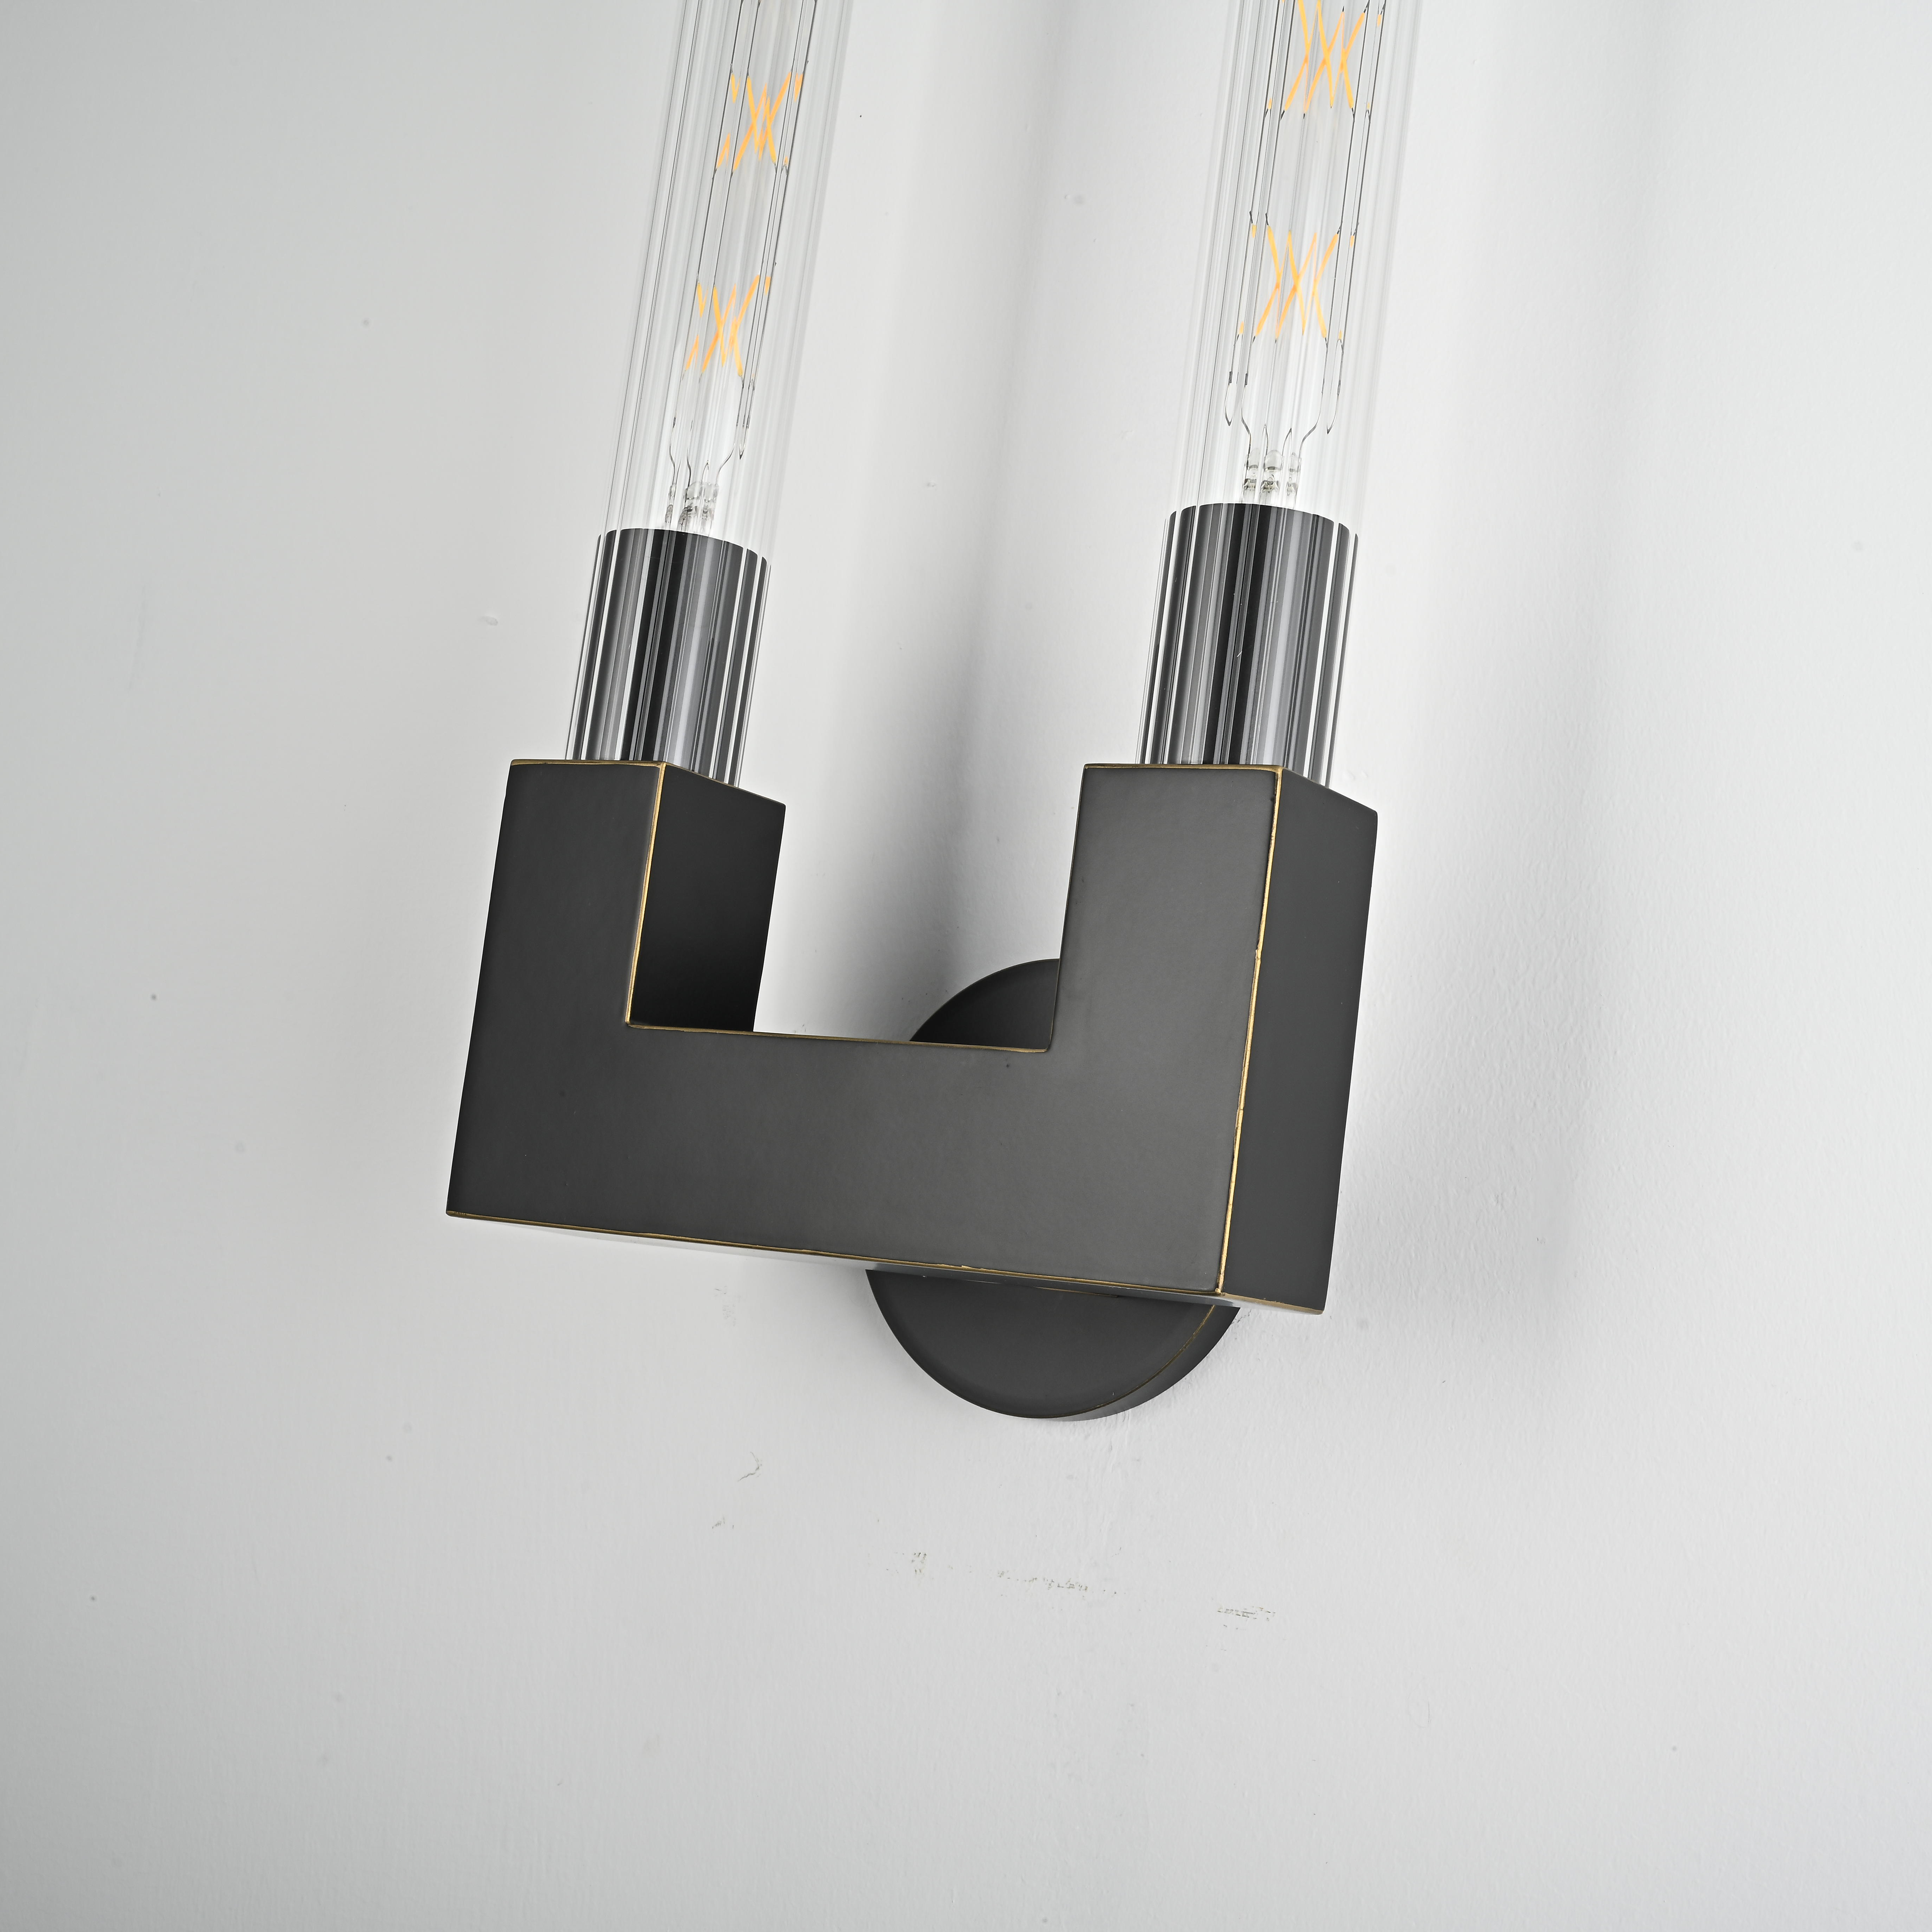 Бра Rh Cannelle Wall Lamp Double Sconces Black от Imperiumloft 147874-22